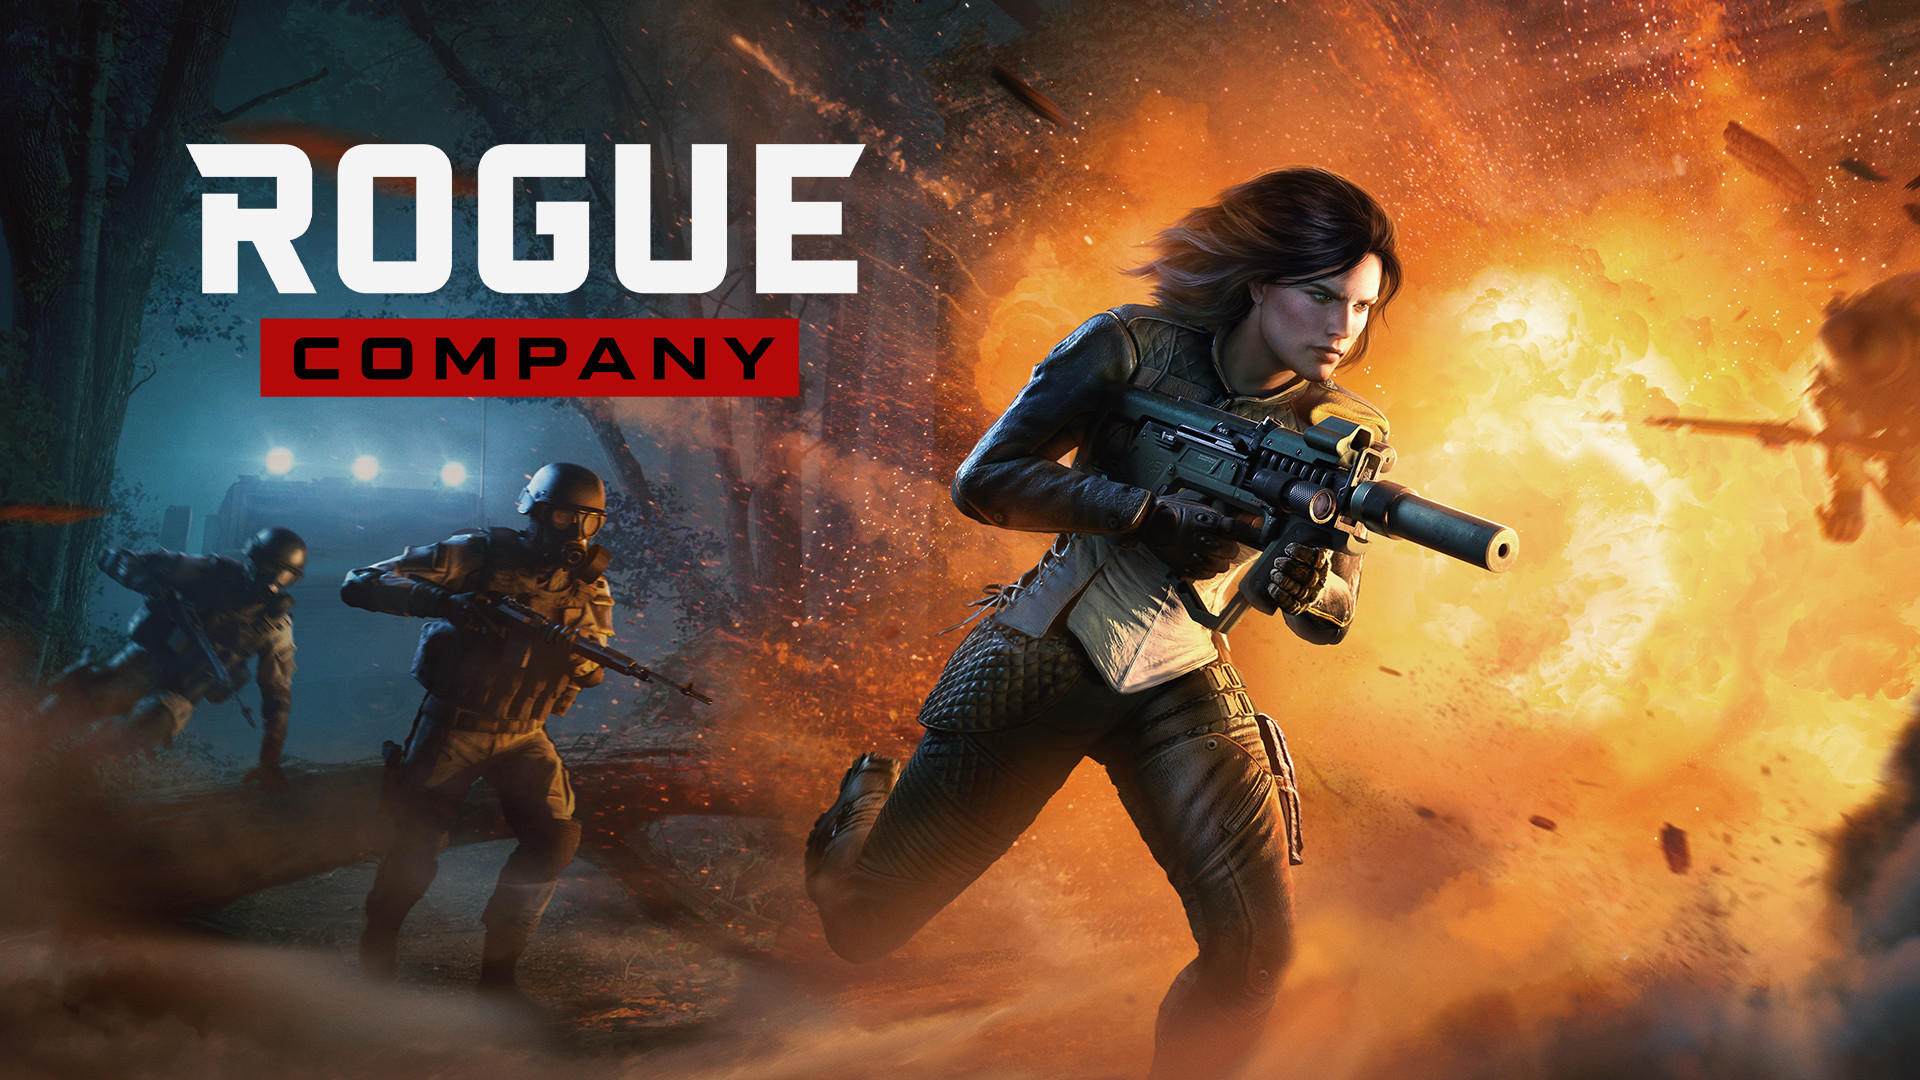 Rogue Company Patch Notes- A glimpse added to the game